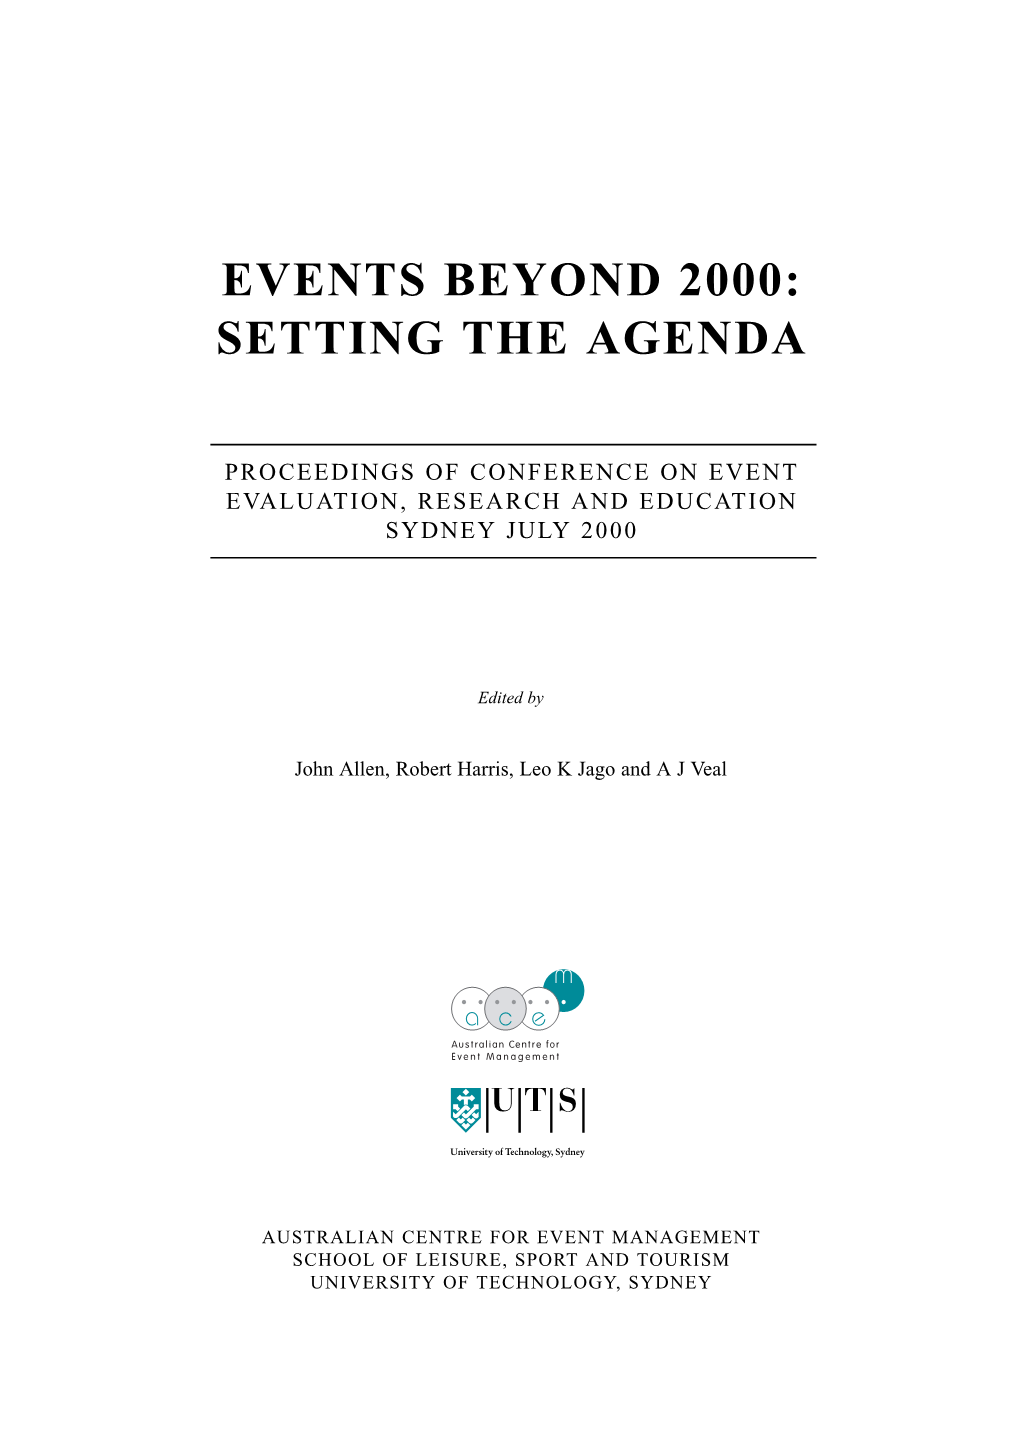 Events Beyond 2000: Setting the Agenda